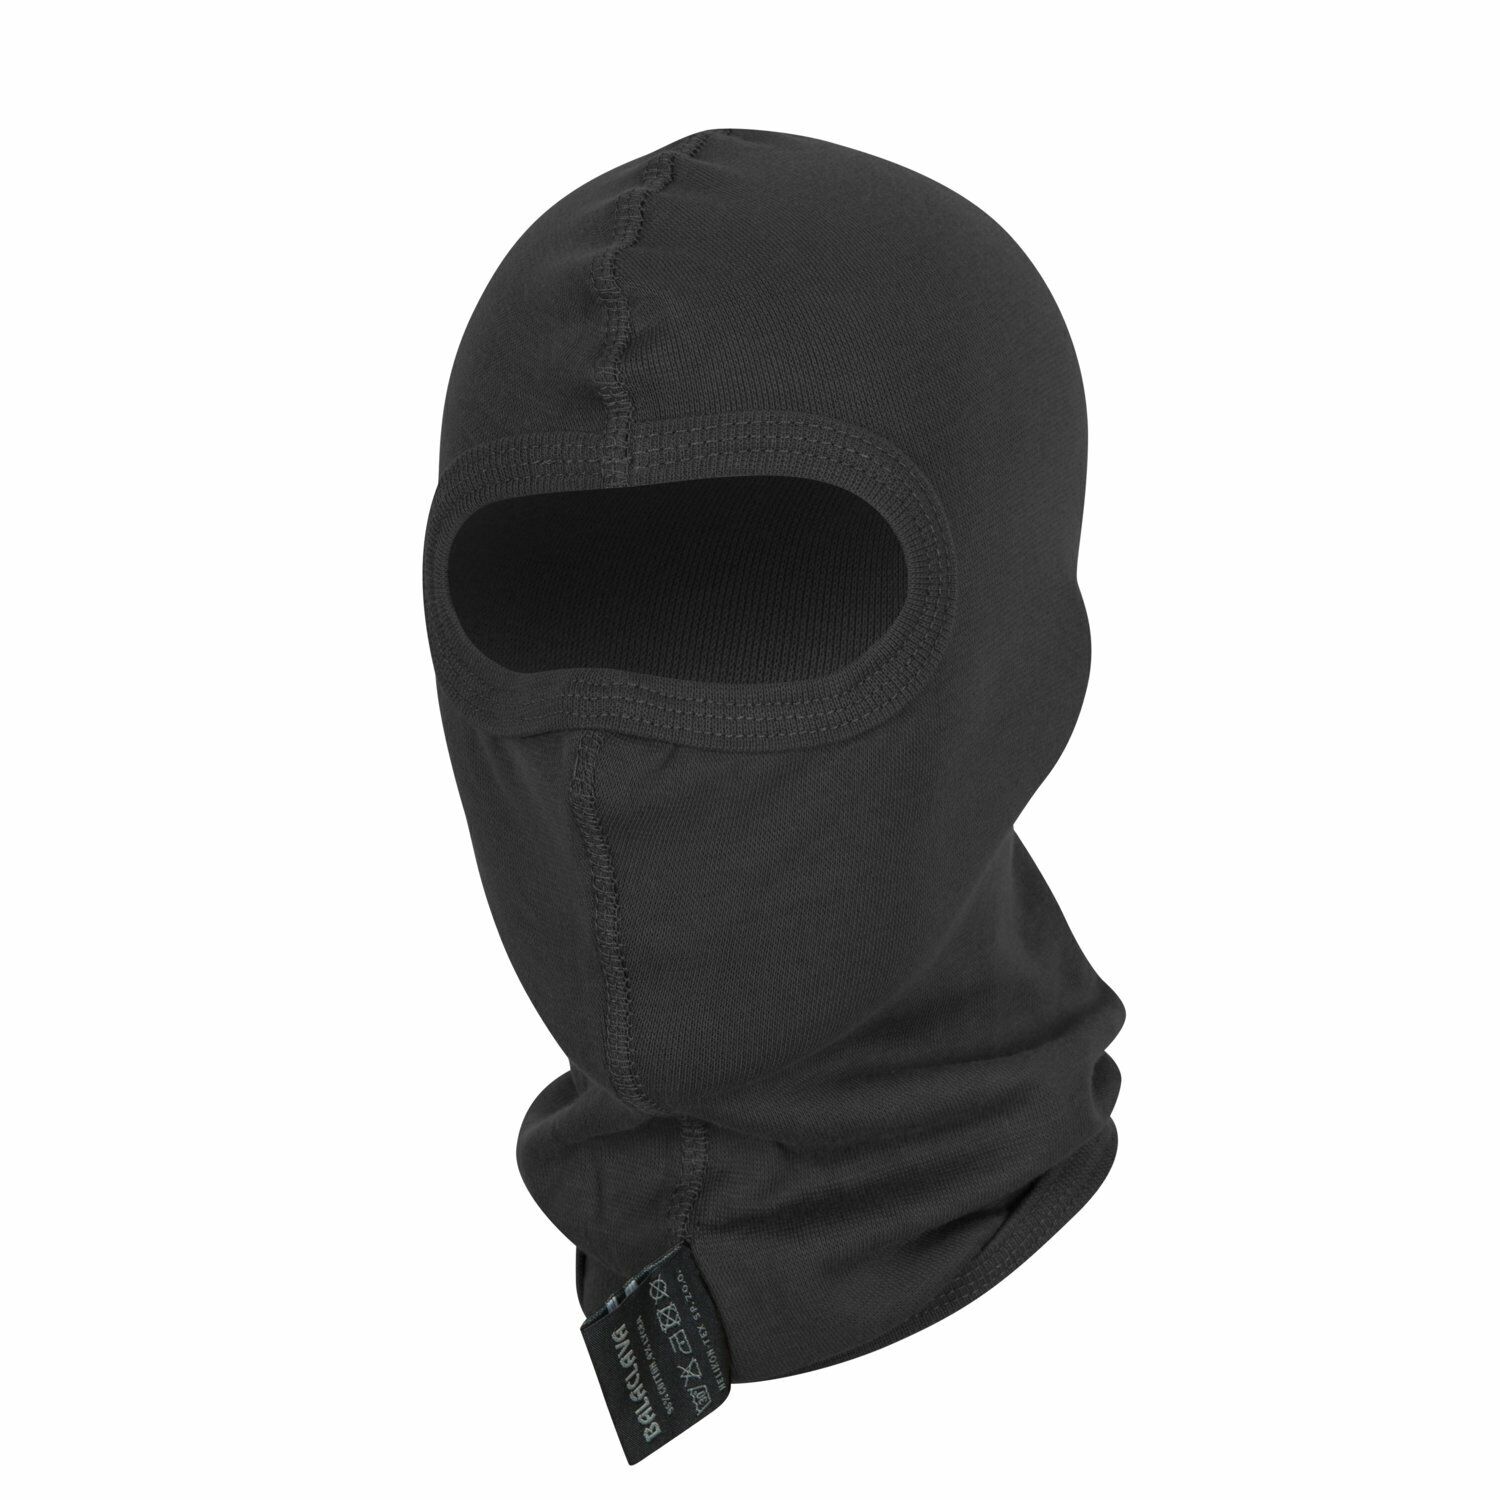 Helikon-Tex BALACLAVA Tactical Army Airsoft Security Military hat Police Combat